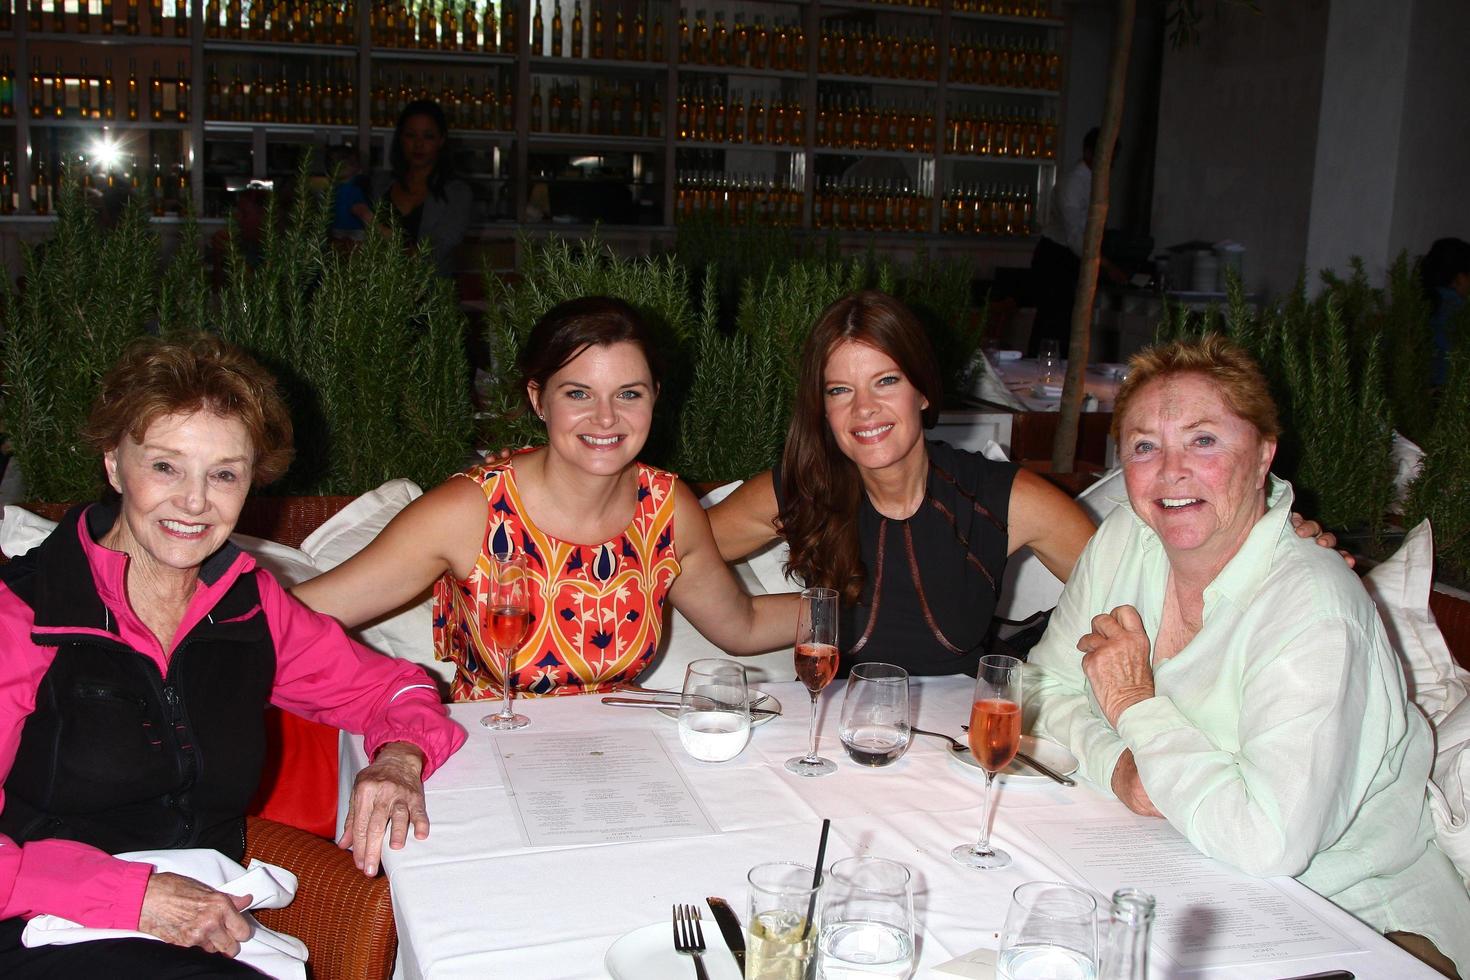 LOS ANGELES, JUN 14 -  Peggy McKay, Heather Tom, Michelle Stafford, Susan Flannery attends the Leading Ladiaes of Daytime luncheon at the Fig and Olive on June 14, 2013 in West Hollywood, CA photo